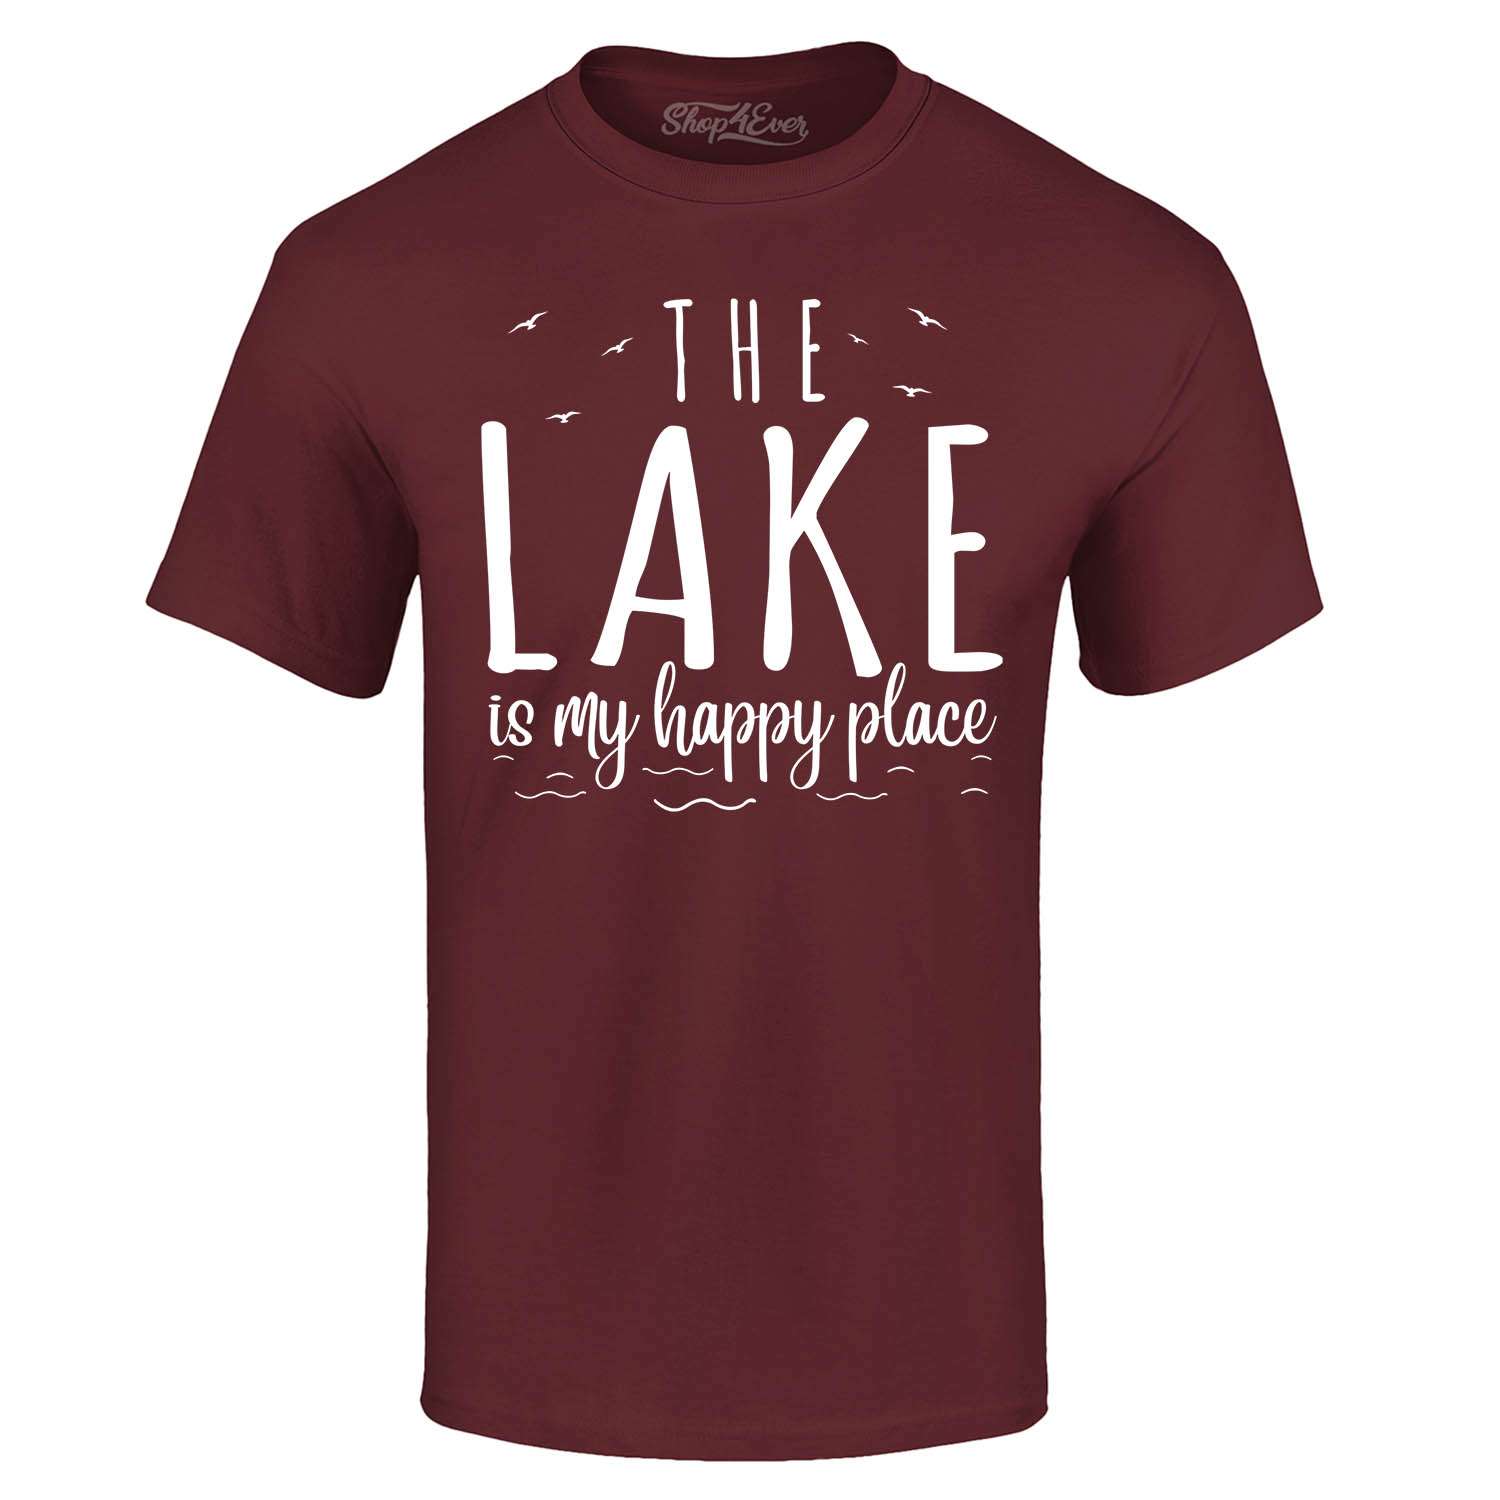 Weekend Gift Lake Tee Gift for Her Lake gift Lake Long Sleeves The Lake is my Happy Place Long Sleeve